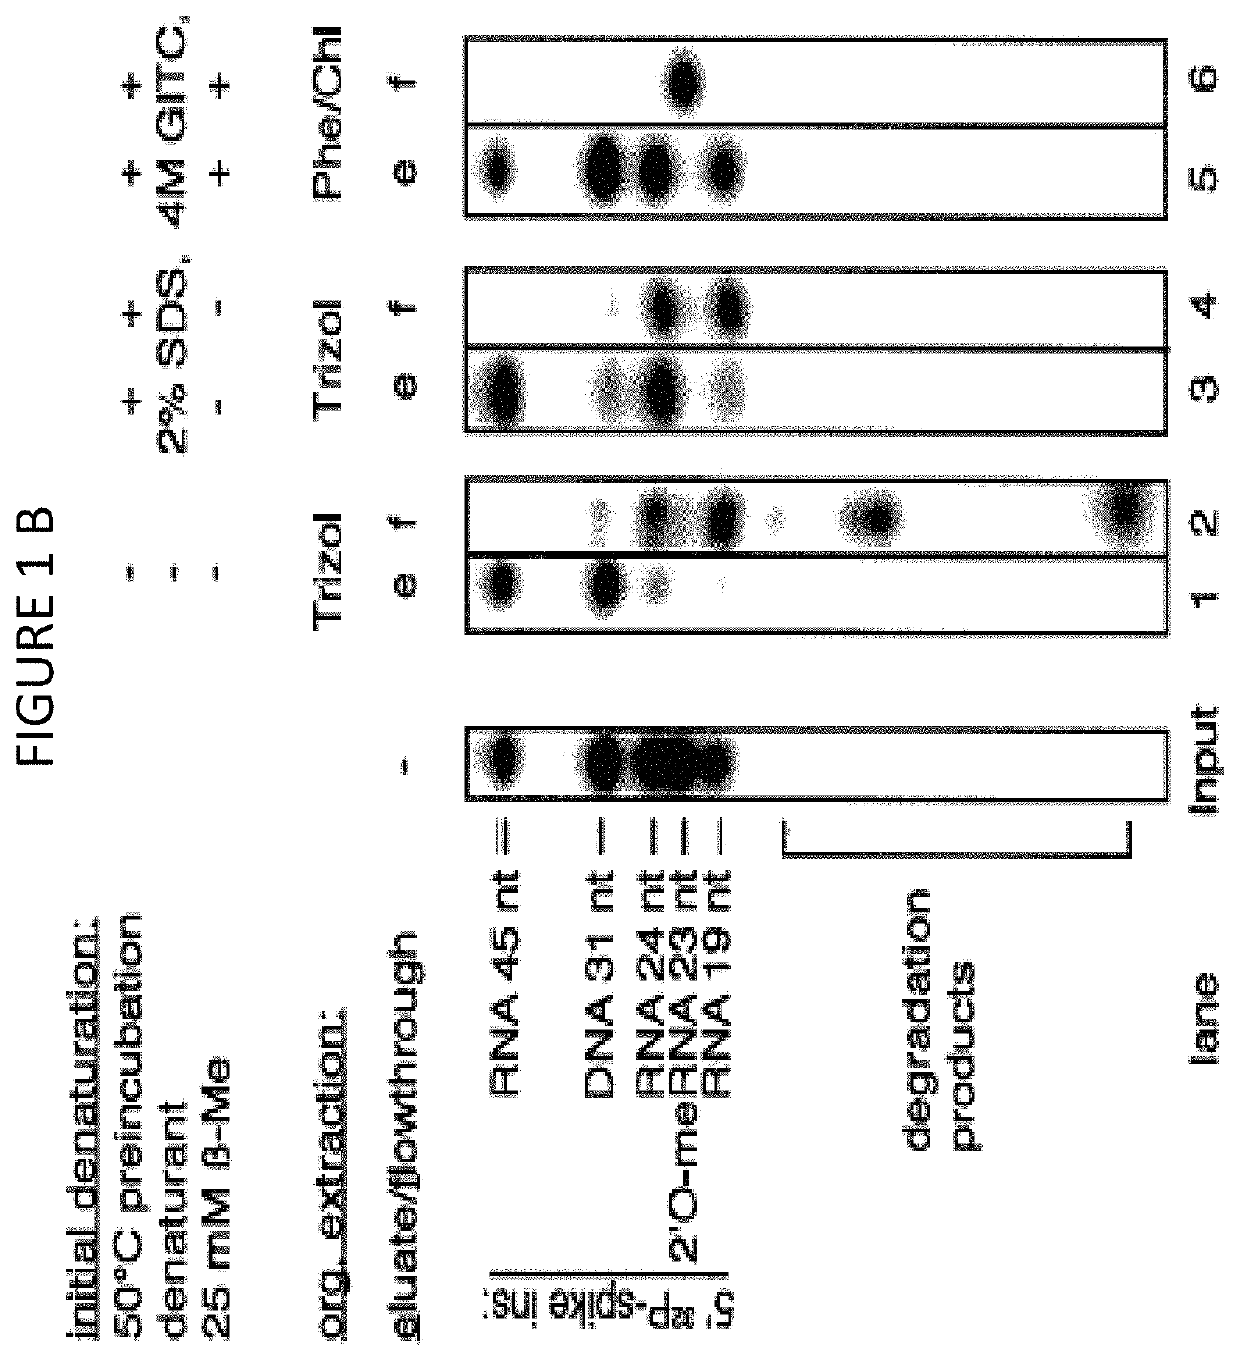 Method of RNA isolation from clinical samples